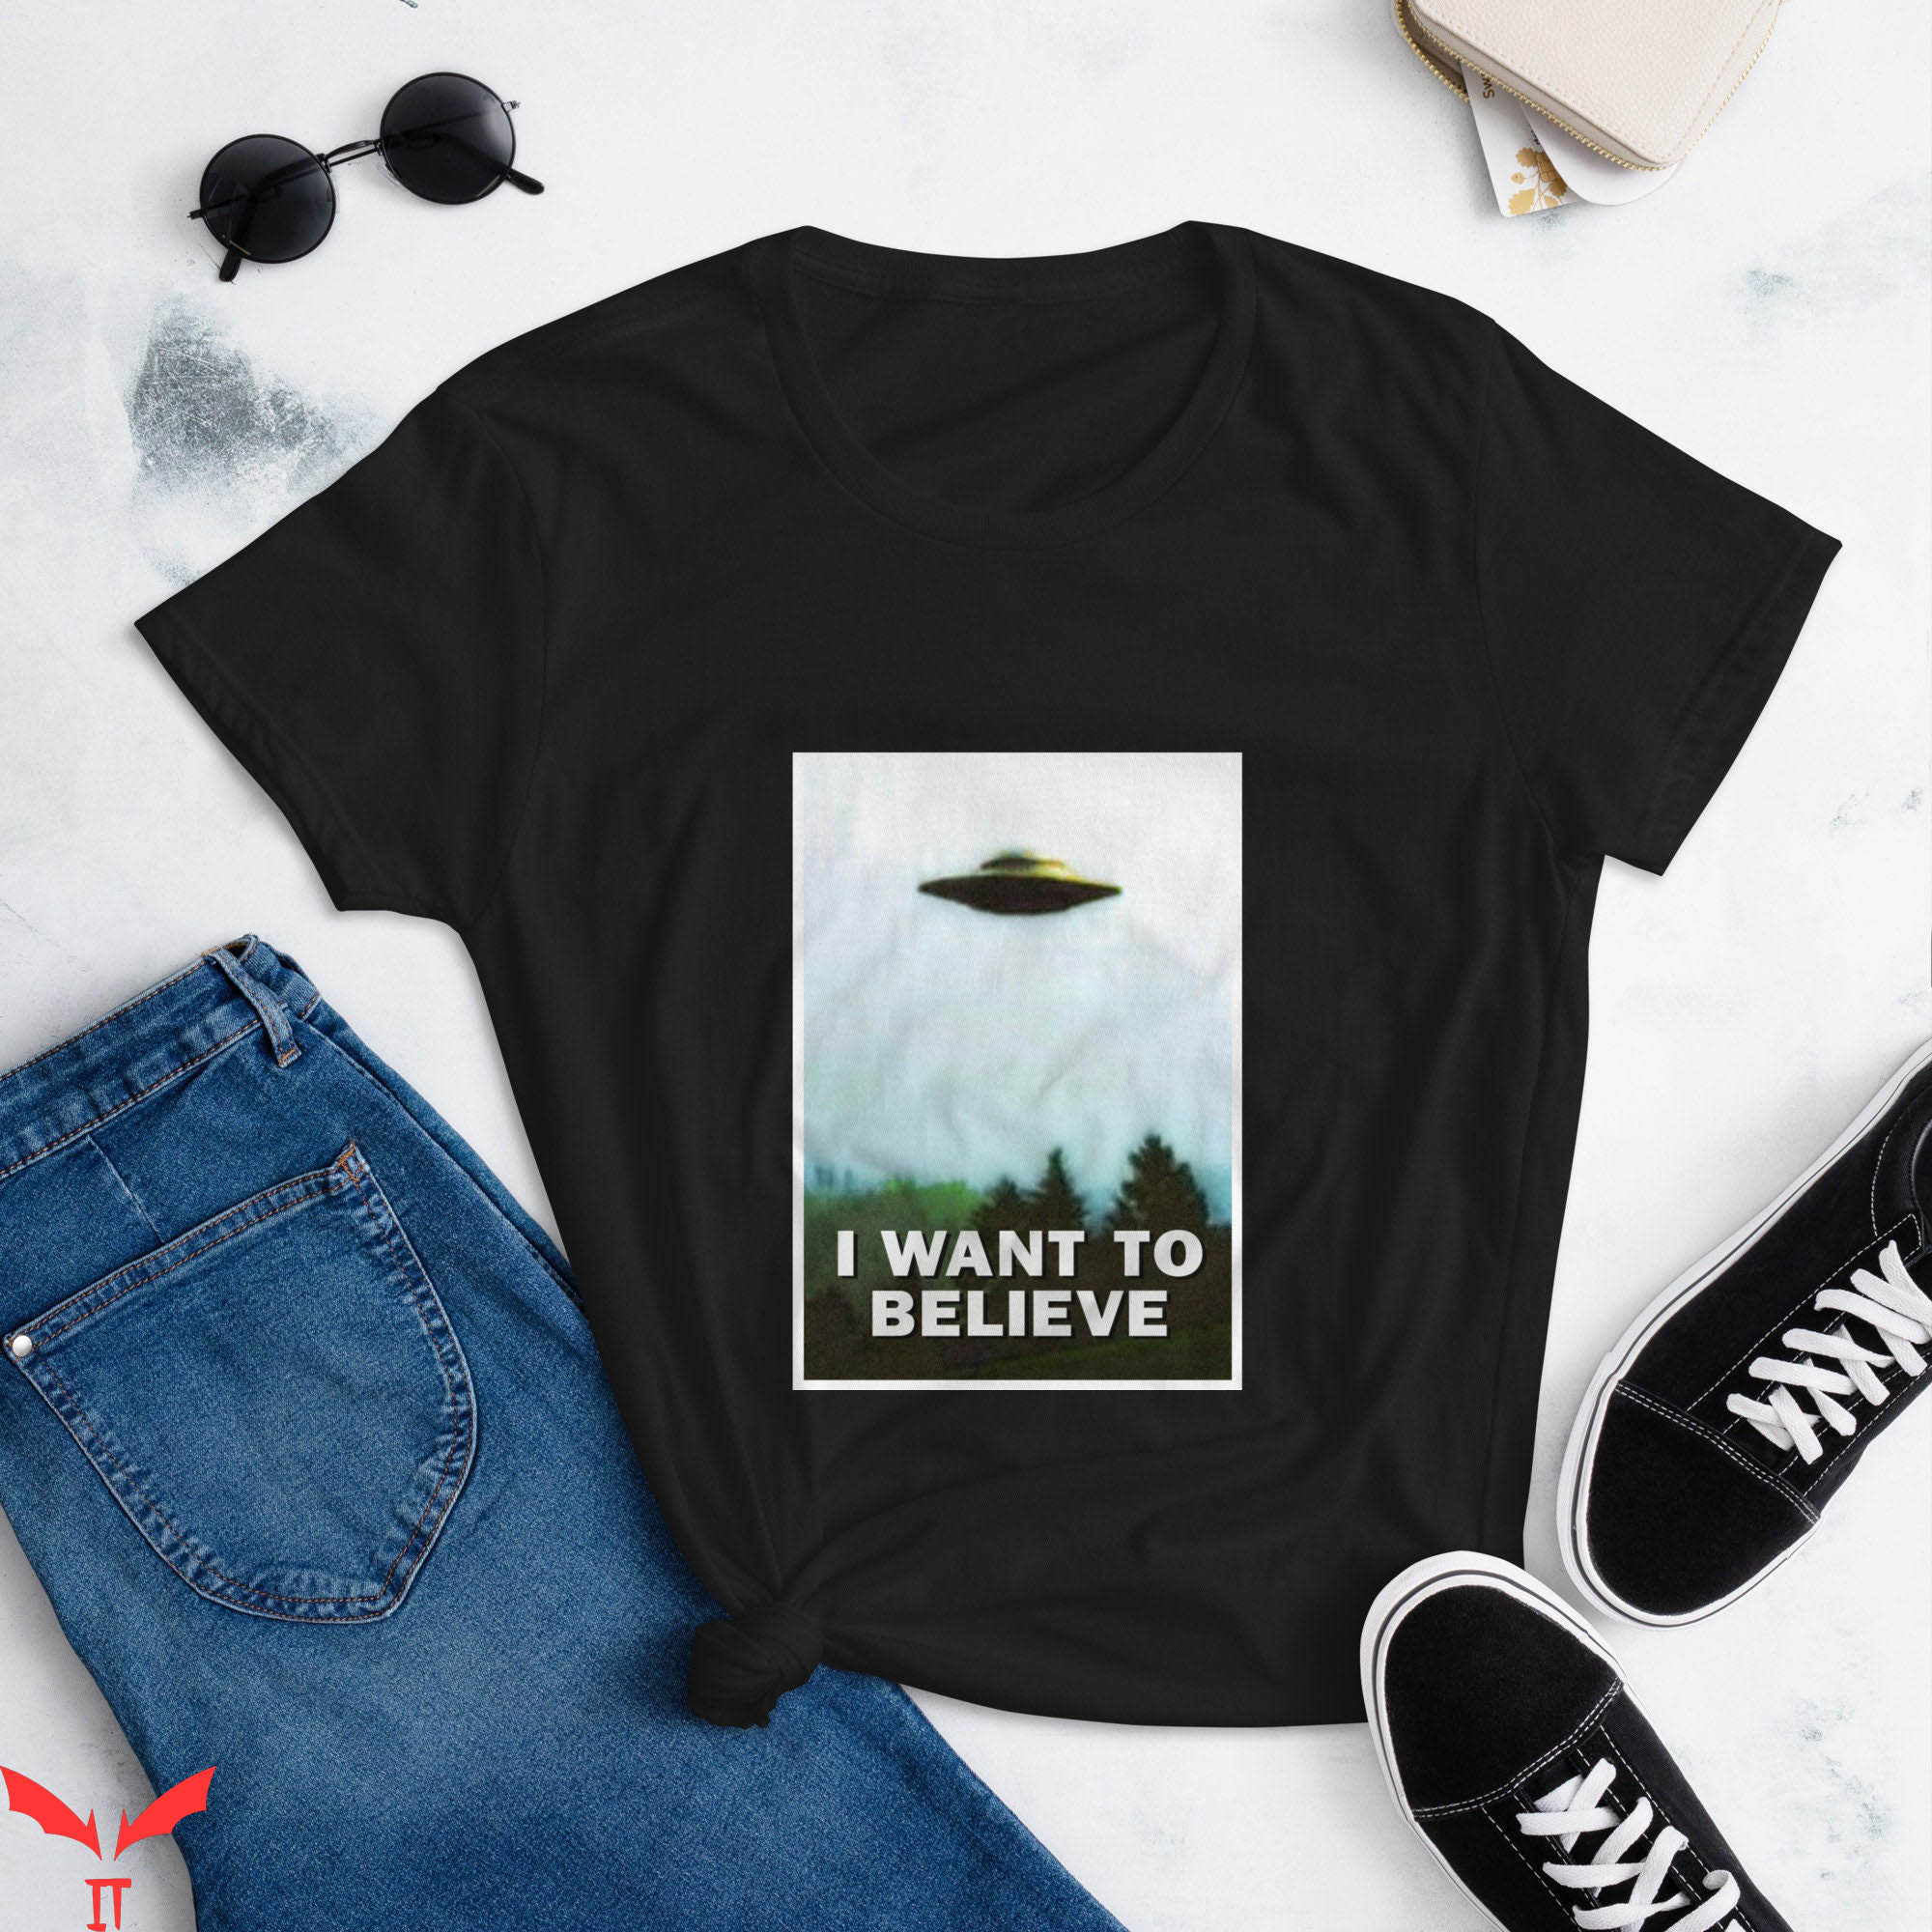 X Files Vintage T-Shirt I Want To Believe Science Fiction